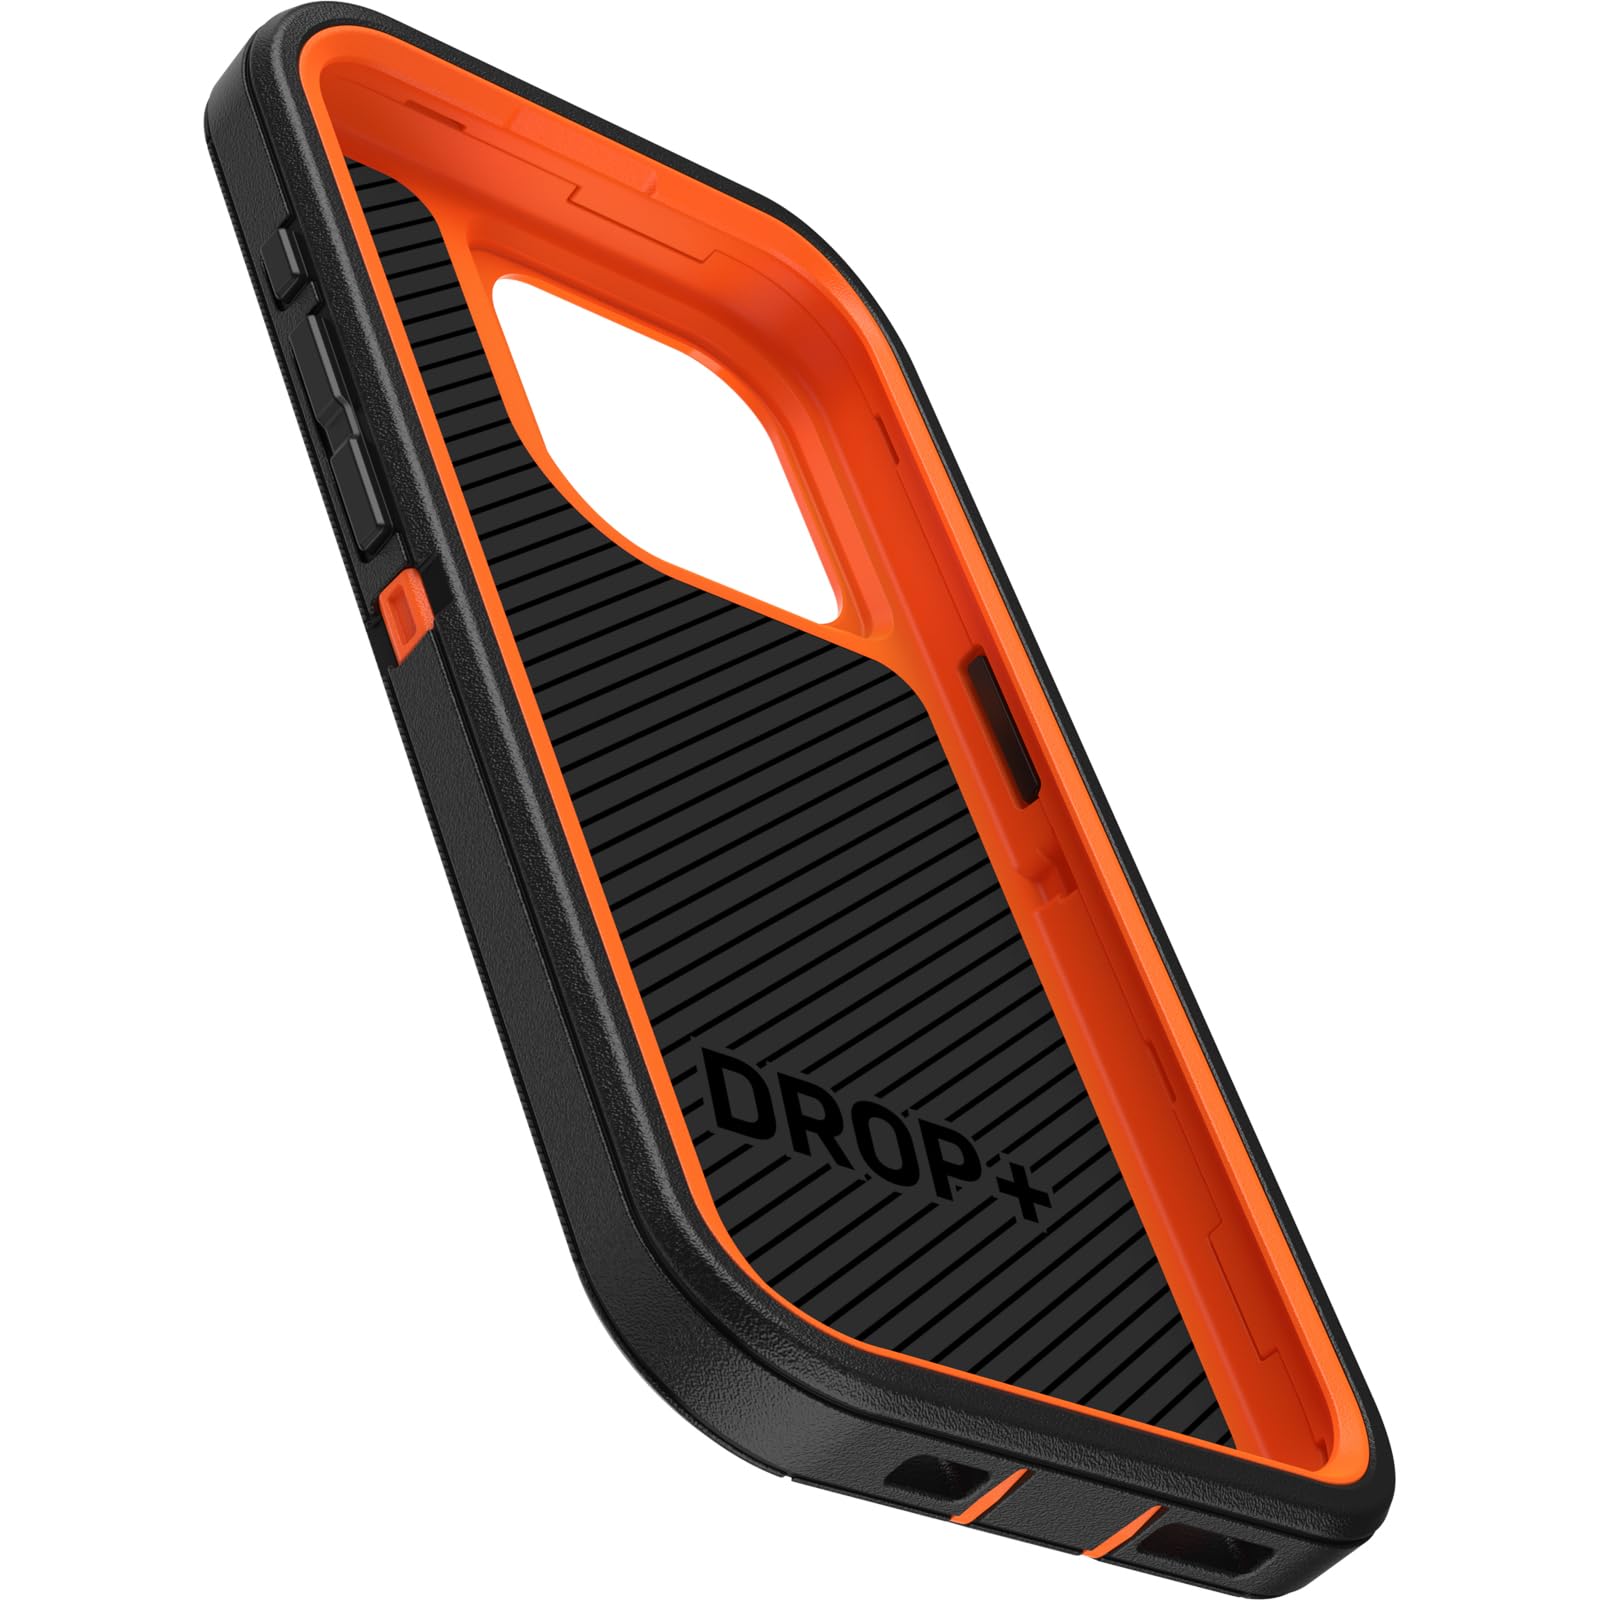 OtterBox iPhone 15 Pro (Only) Defender Series Case - REALTREE EDGE (Blaze Orange/Black/RT Edge) , rugged & durable, with port protection, includes holster clip kickstand